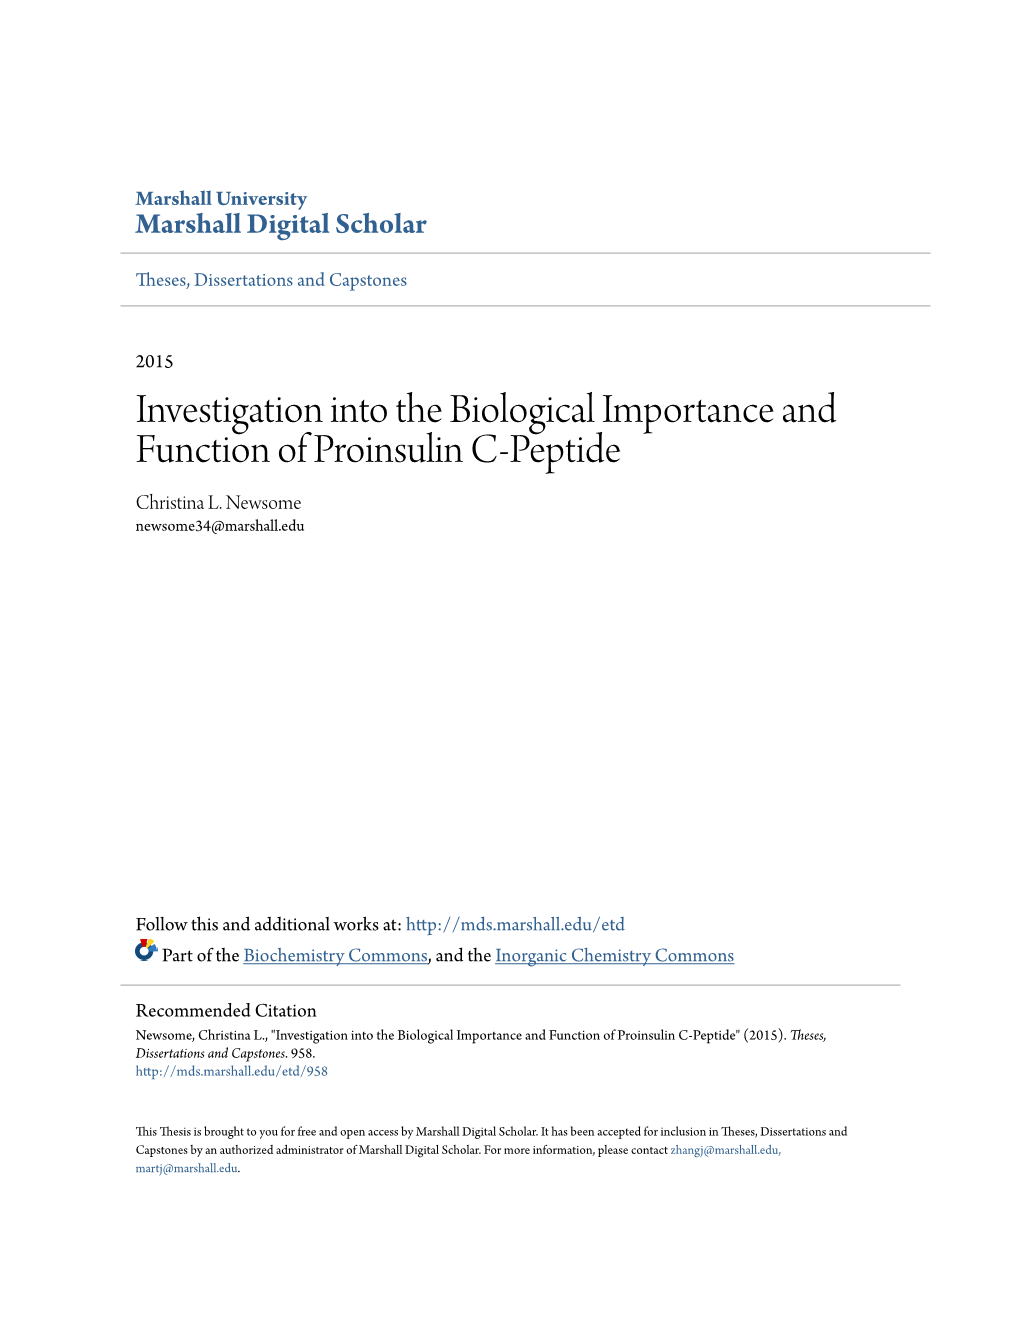 Investigation Into the Biological Importance and Function of Proinsulin C-Peptide Christina L